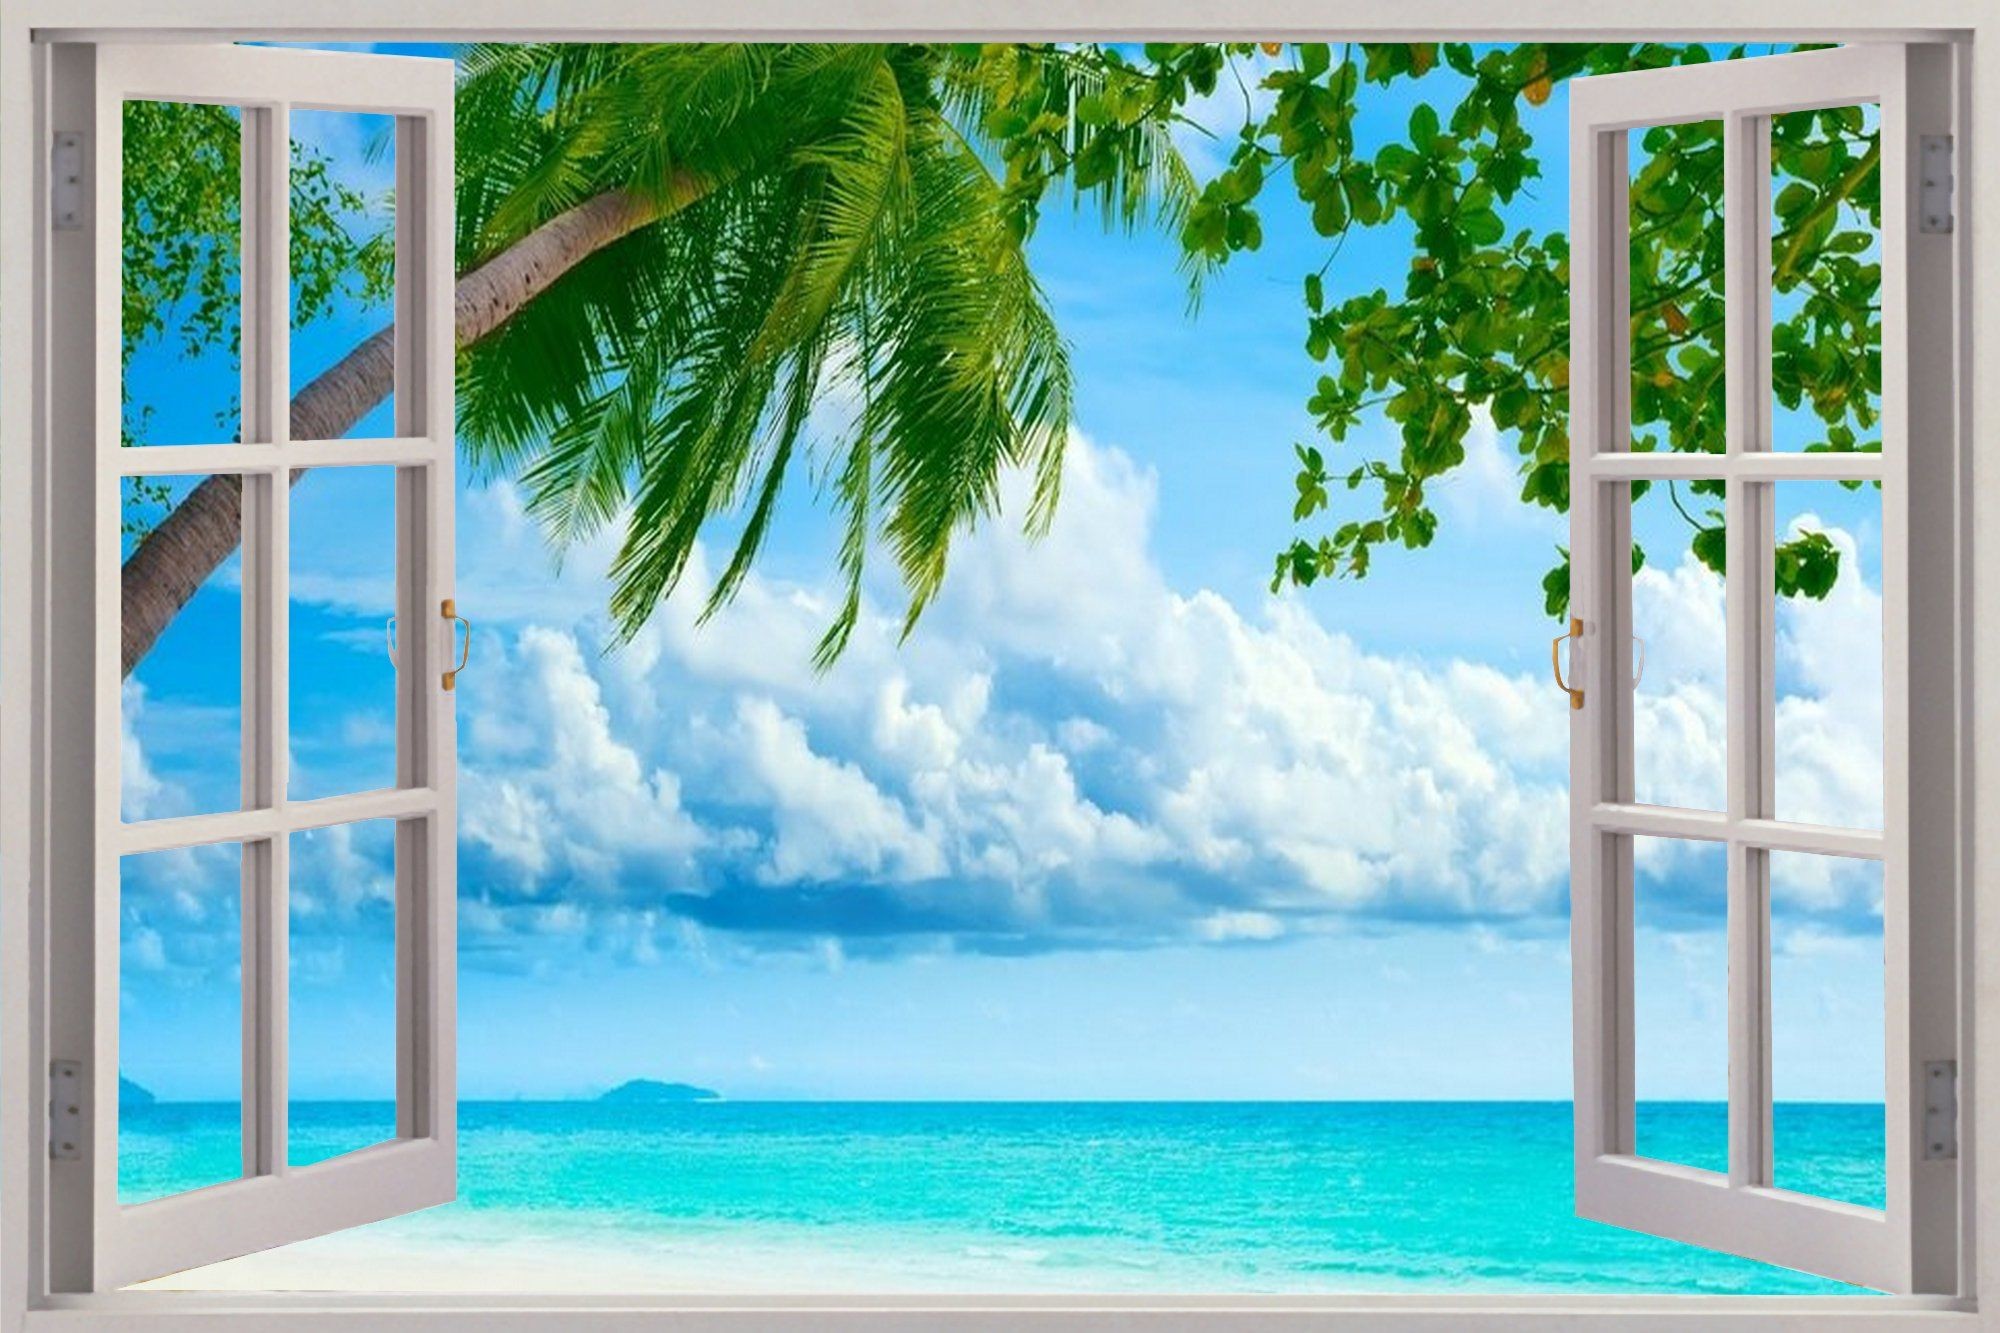 2000x1333 large removable faux beach scene murals - Google Search